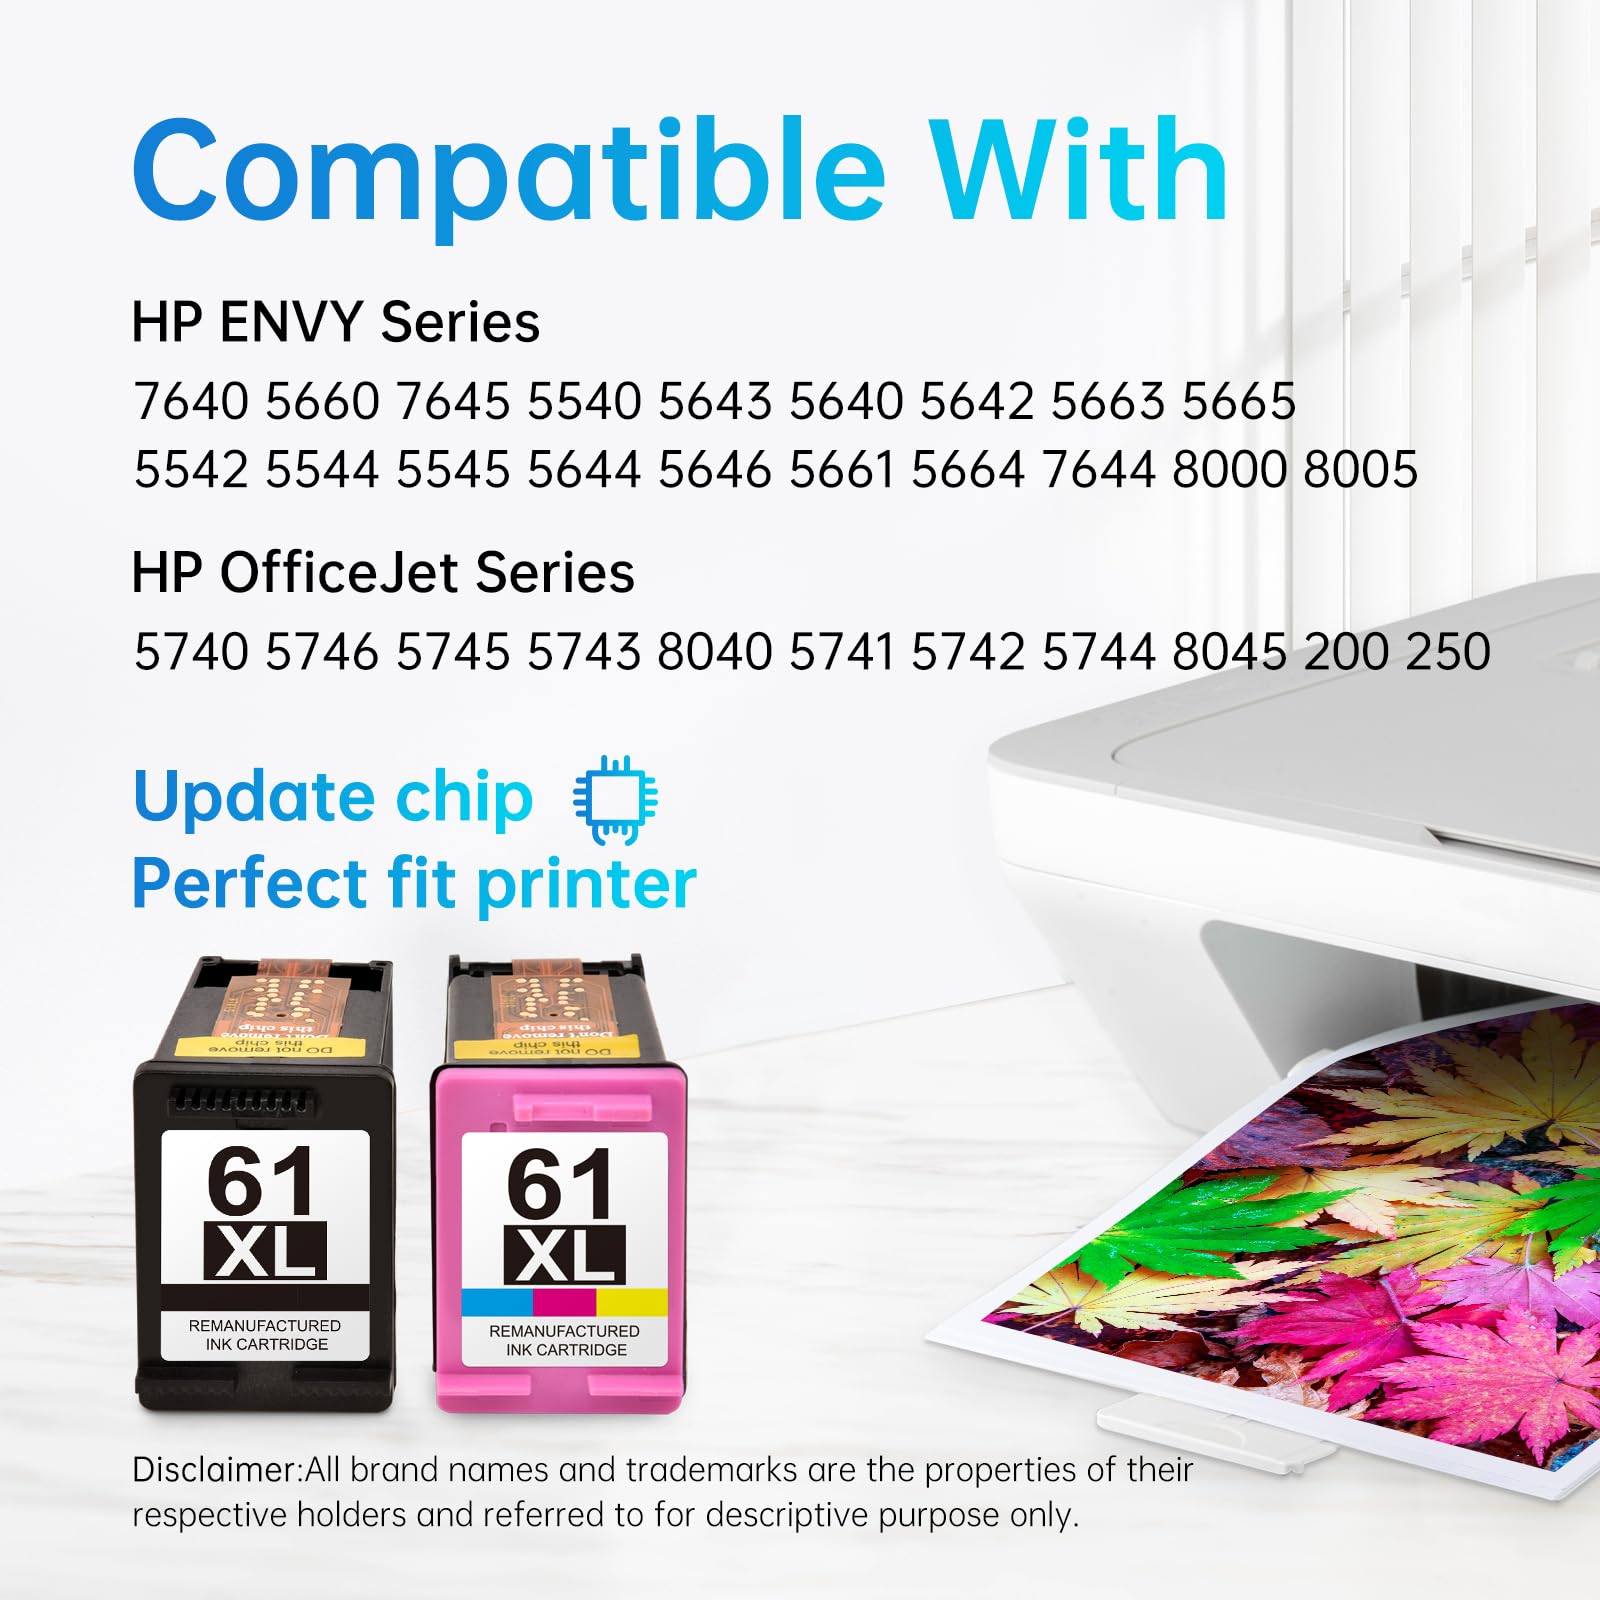 Printer Compatibility for LEMERO HP 61XL Ink Cartridges: "Comprehensive list of HP printer models compatible with LEMERO HP 61XL ink cartridges, featuring updated chip technology for a perfect printer fit, including models from the ENVY and OfficeJet series."